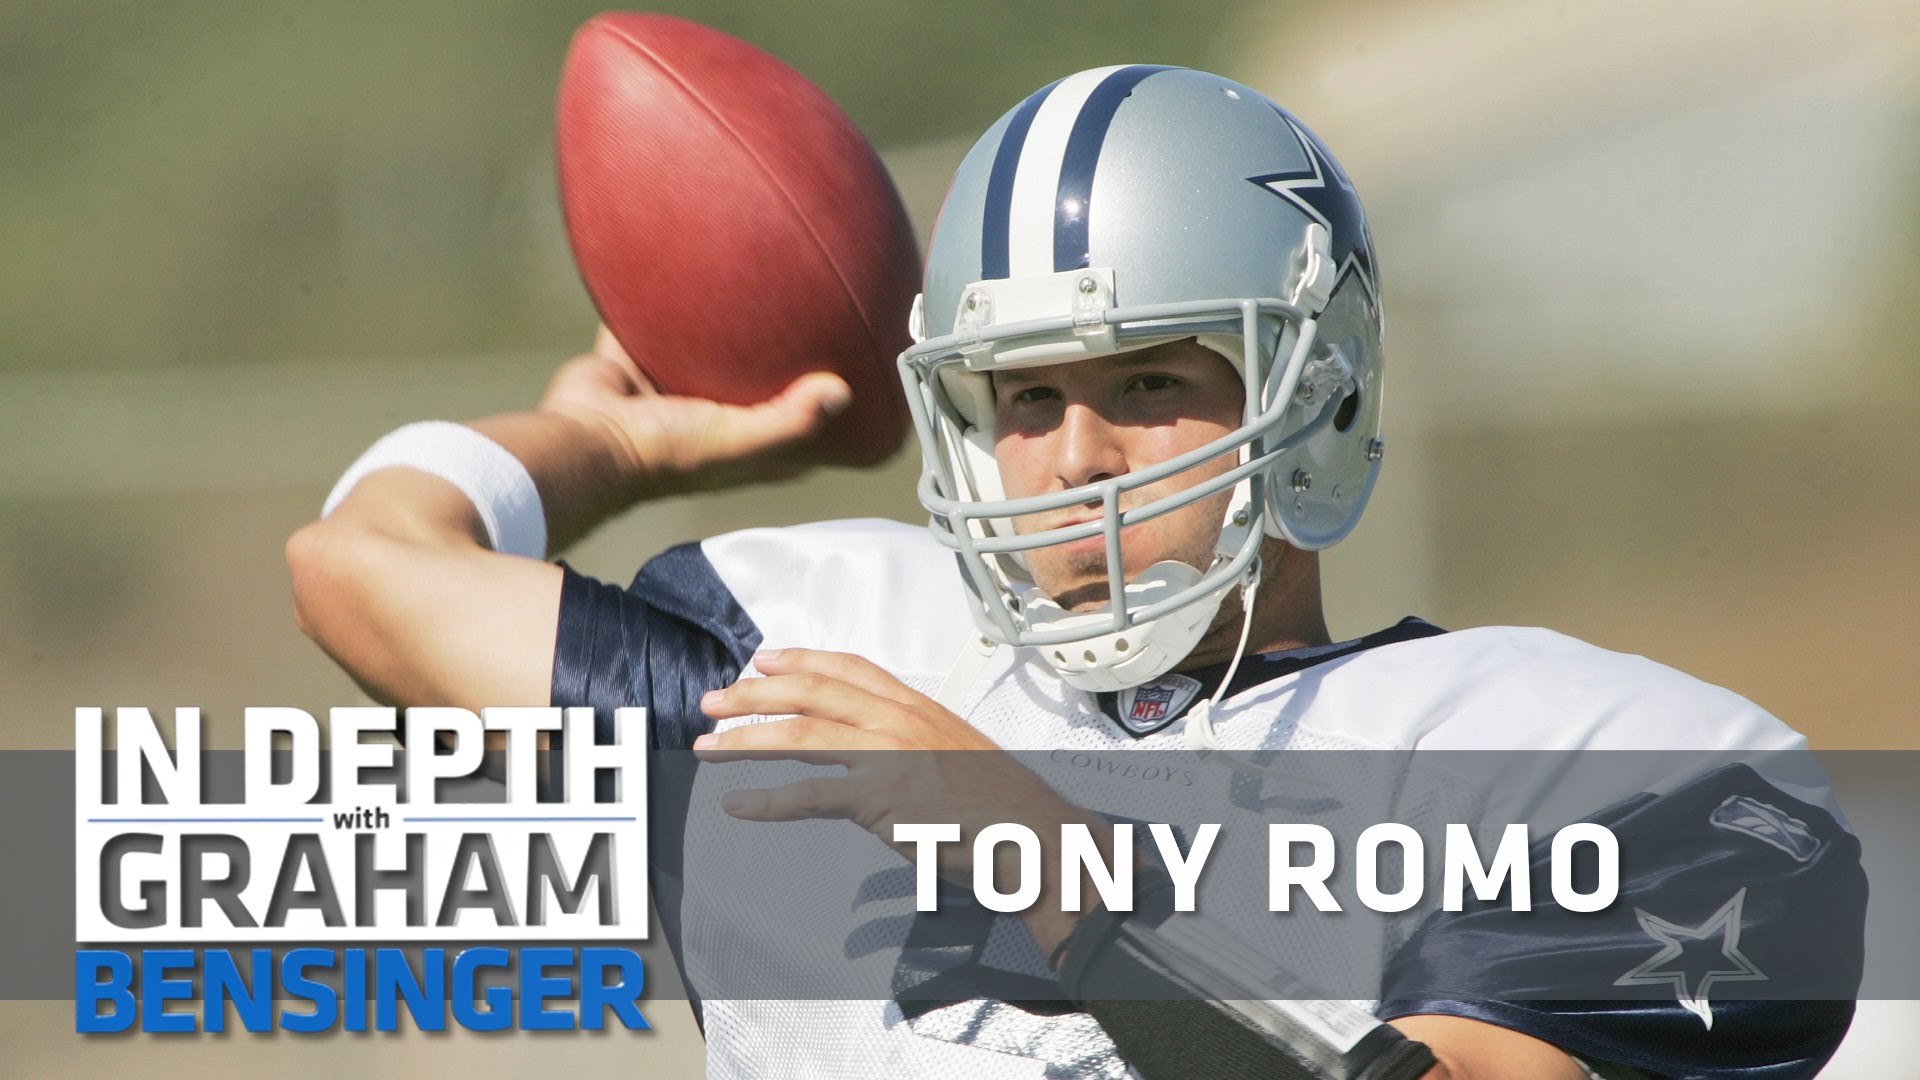 Tony Romo speaks on his doubts of making the NFL